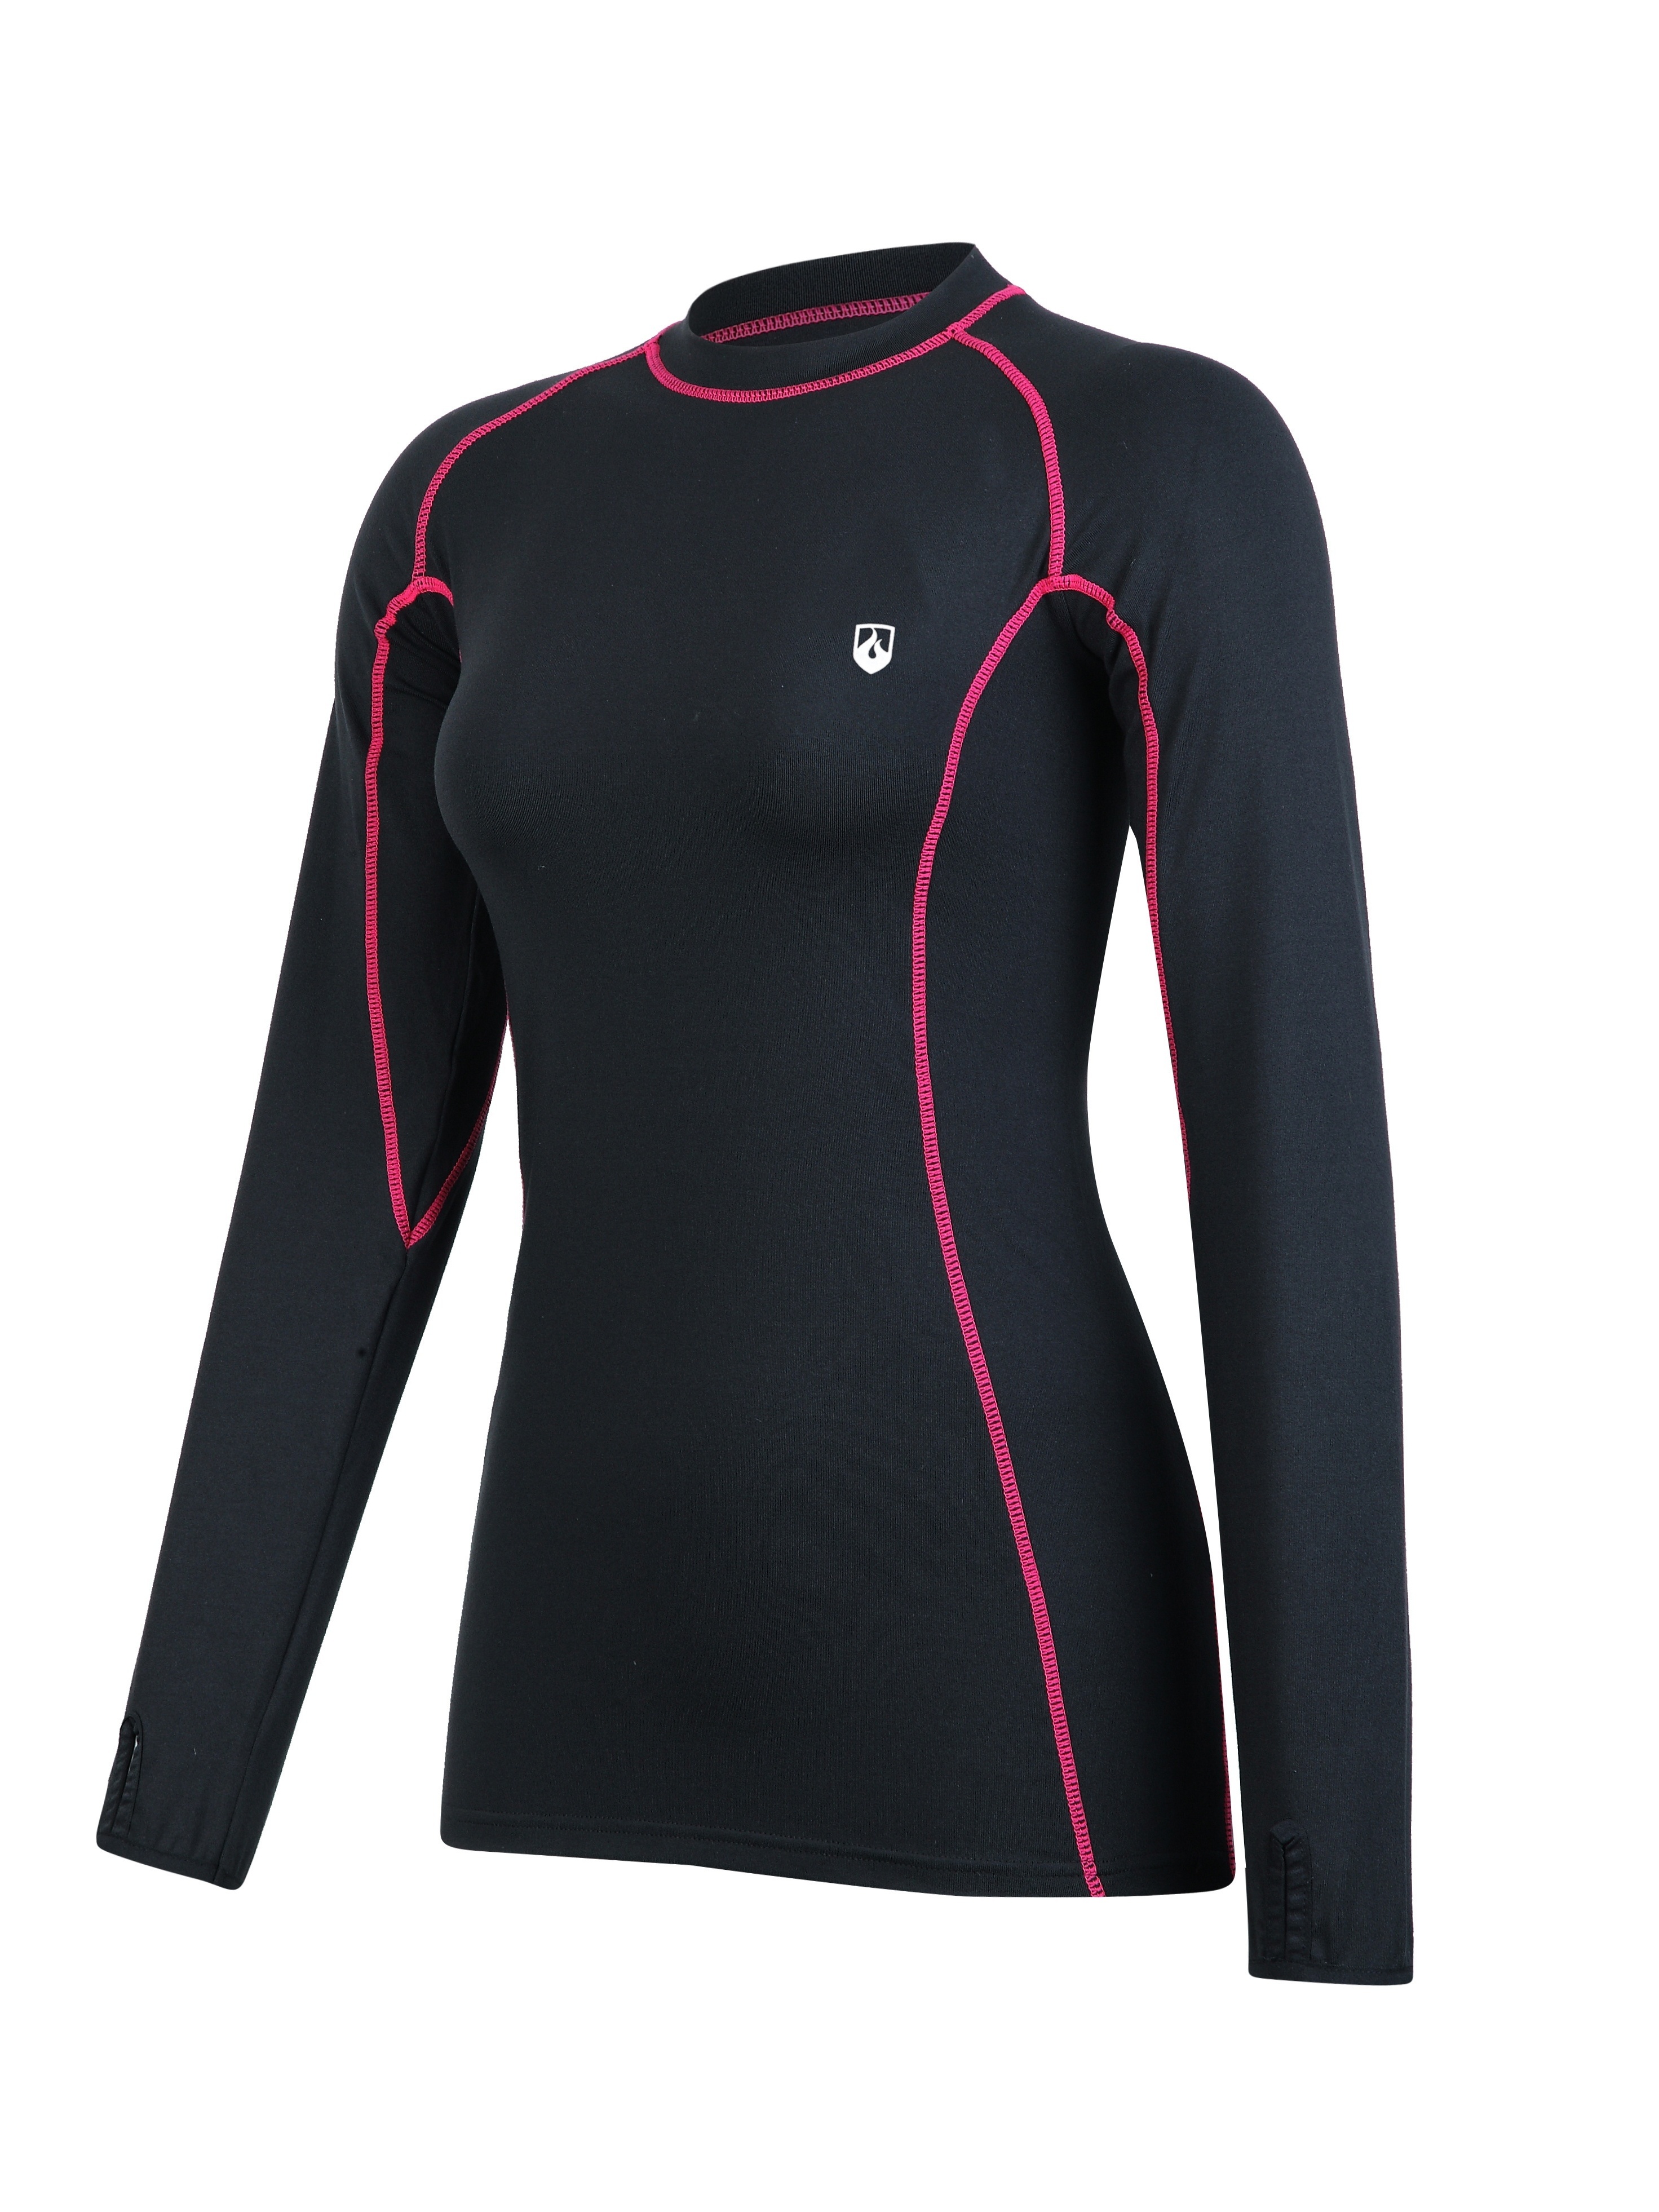 Base layers & functional underwear for snowsports